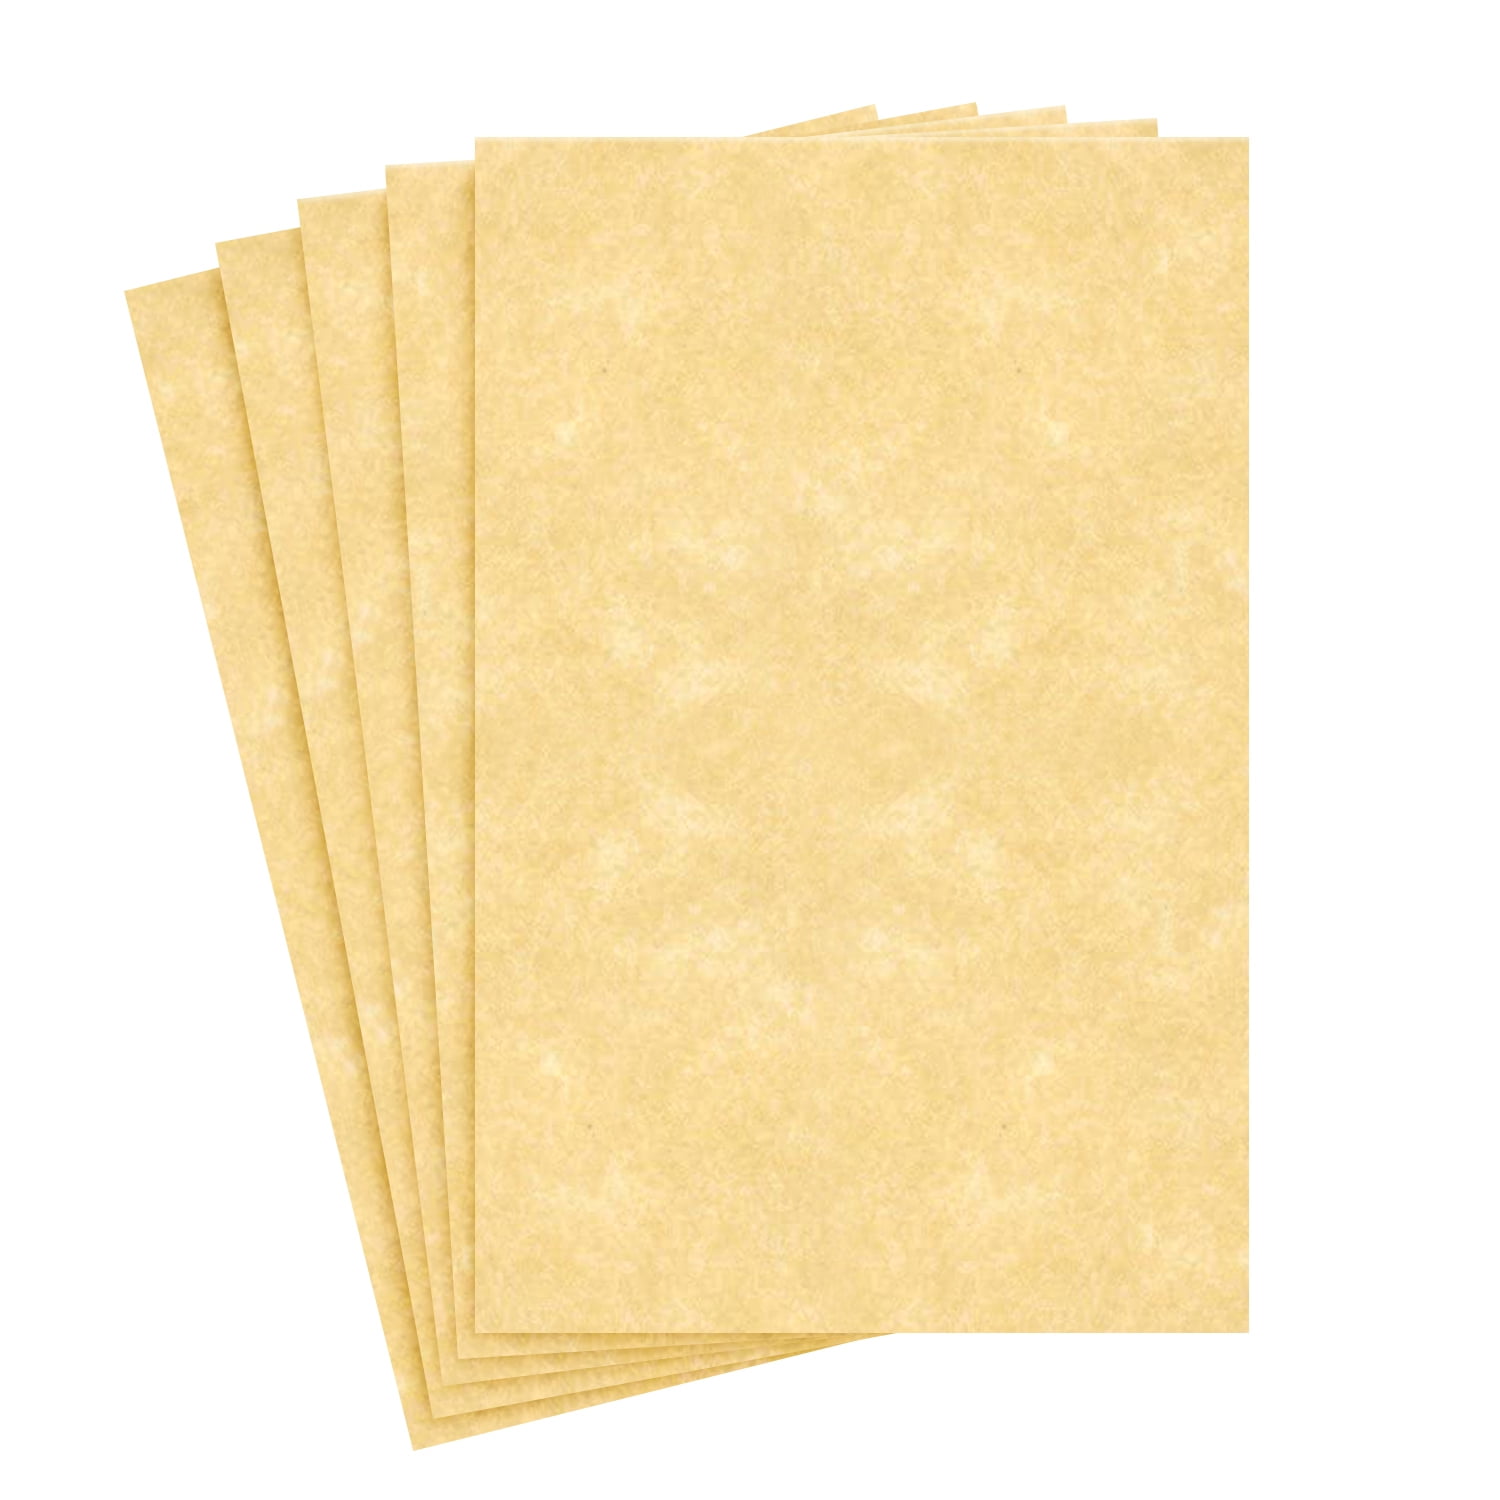 New Champagne 11 x 17 Size Stationery Parchment Colored Regular Papers, Big Ledger Color Paper | 1 Ream of 100 Sheets